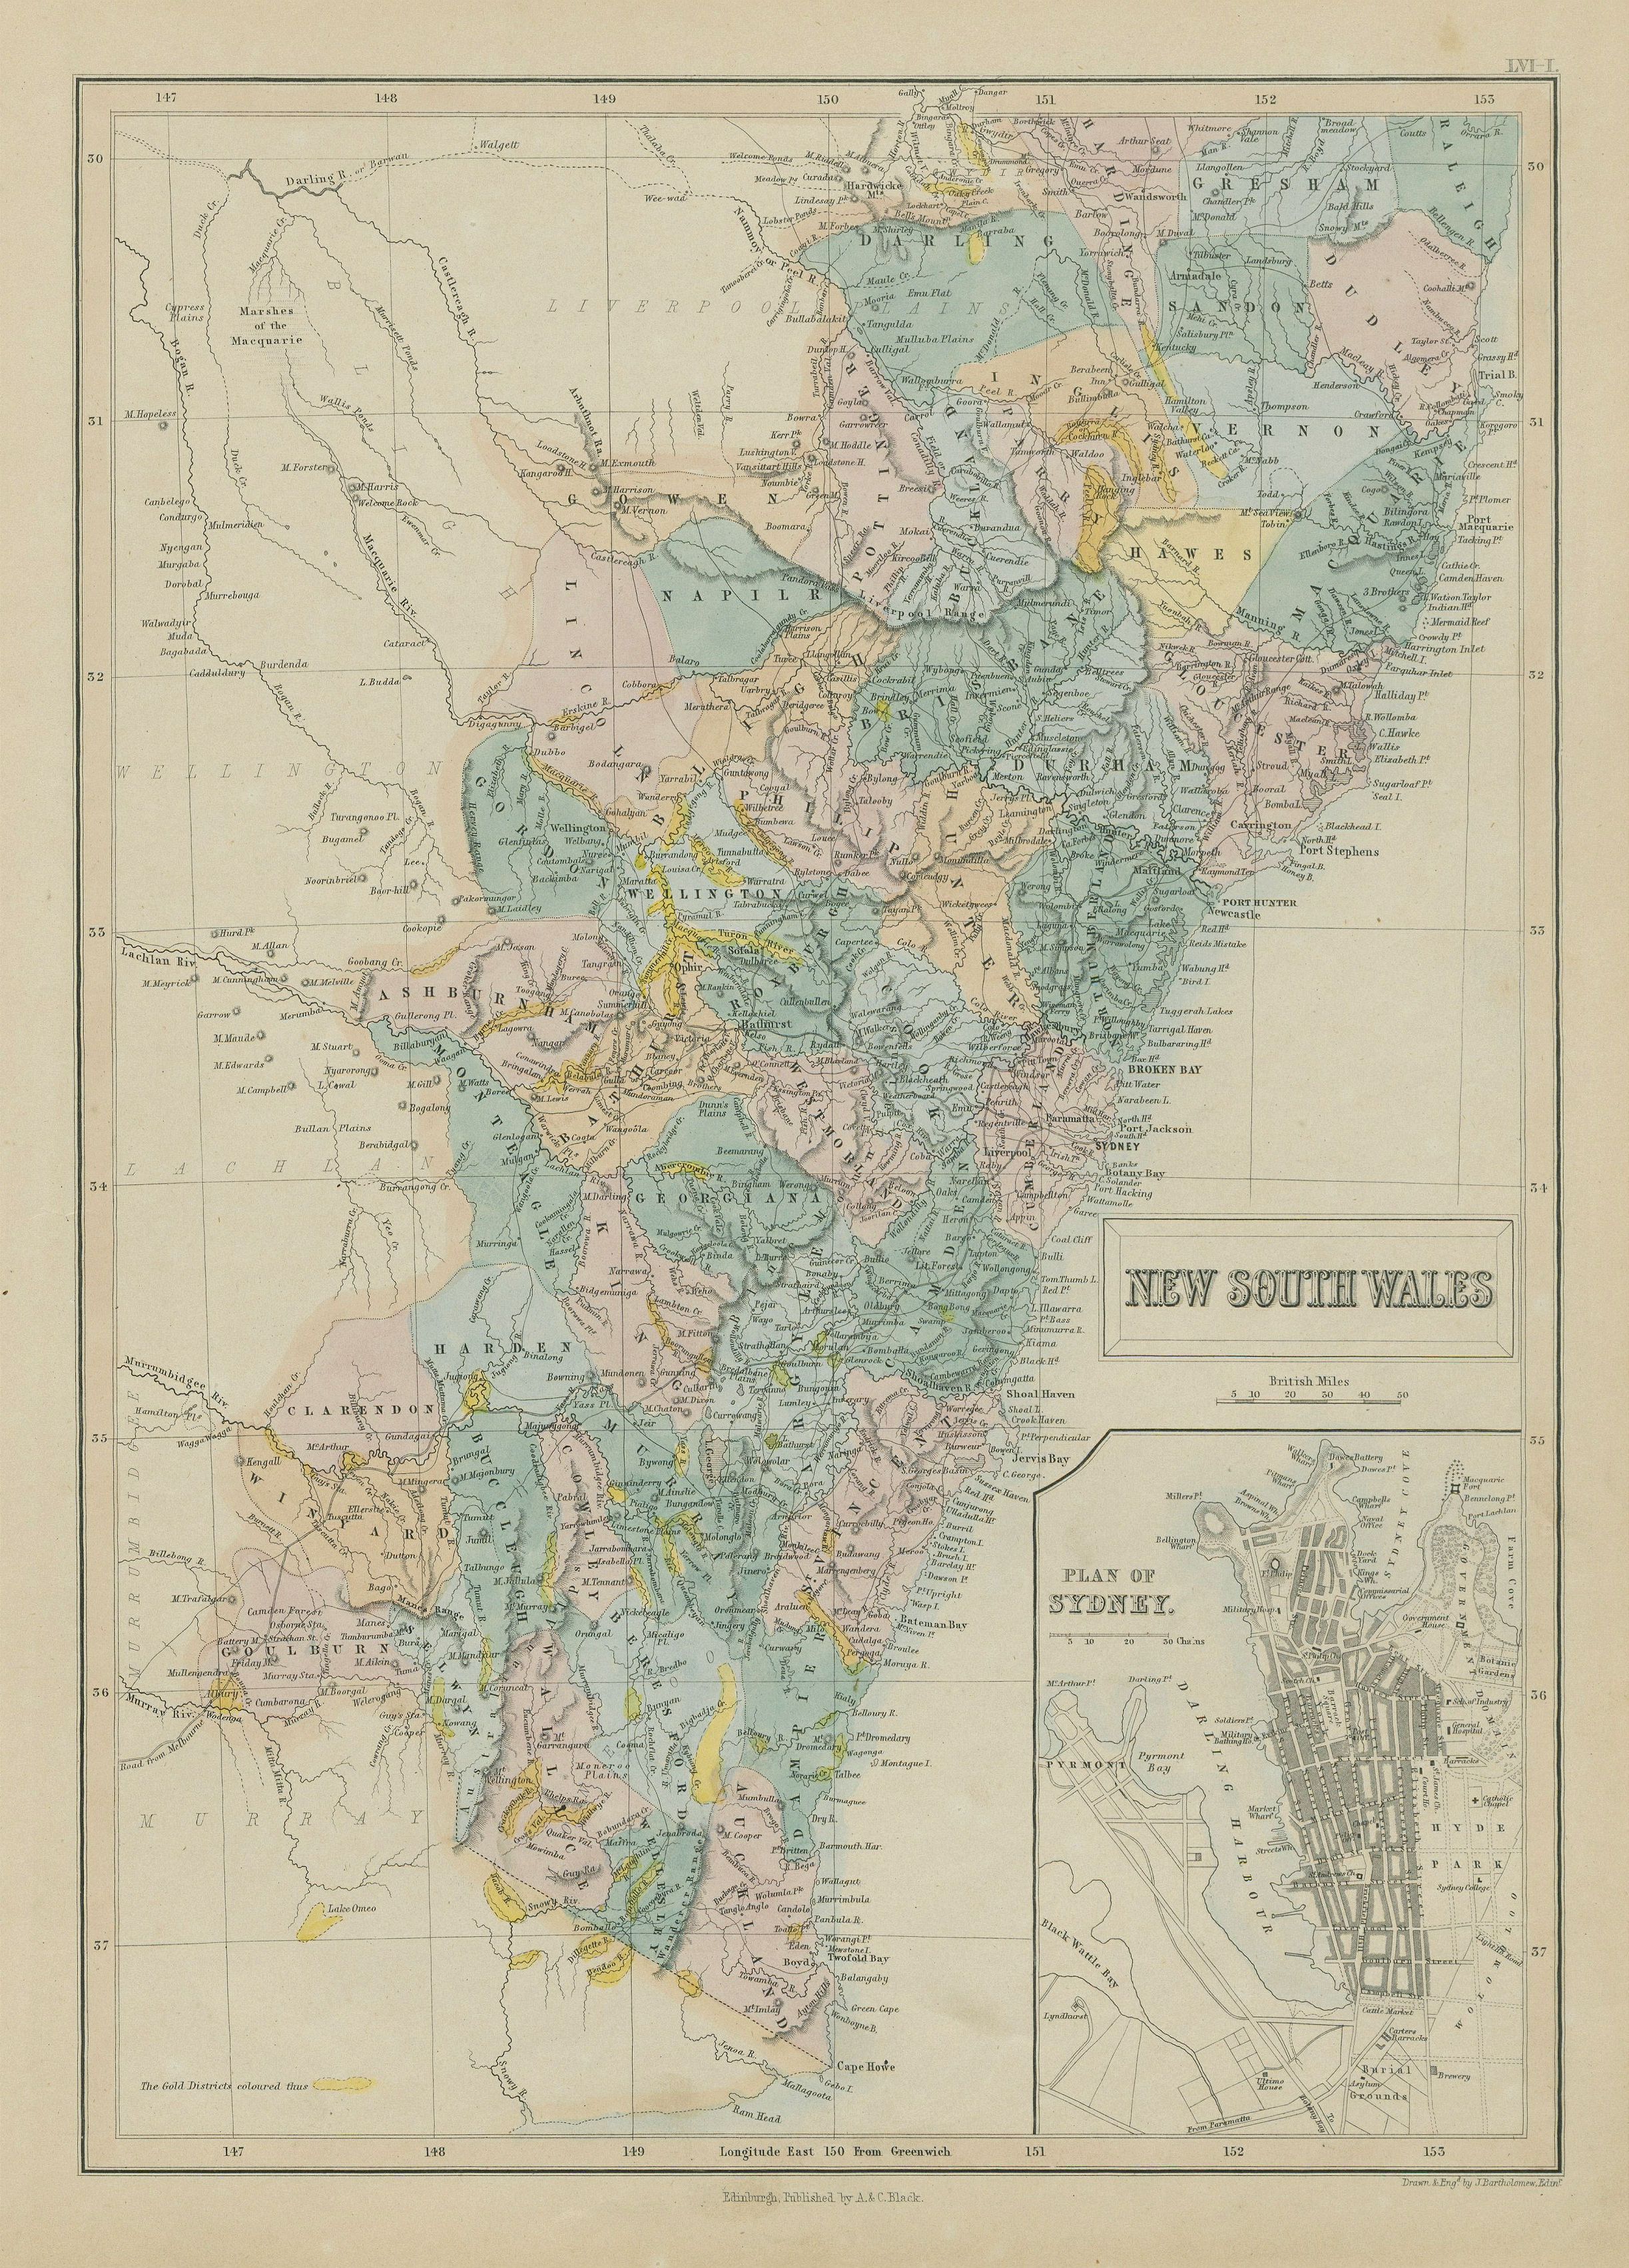 Associate Product New South Wales showing gold rush districts. Inset Sydney city plan 1856 map